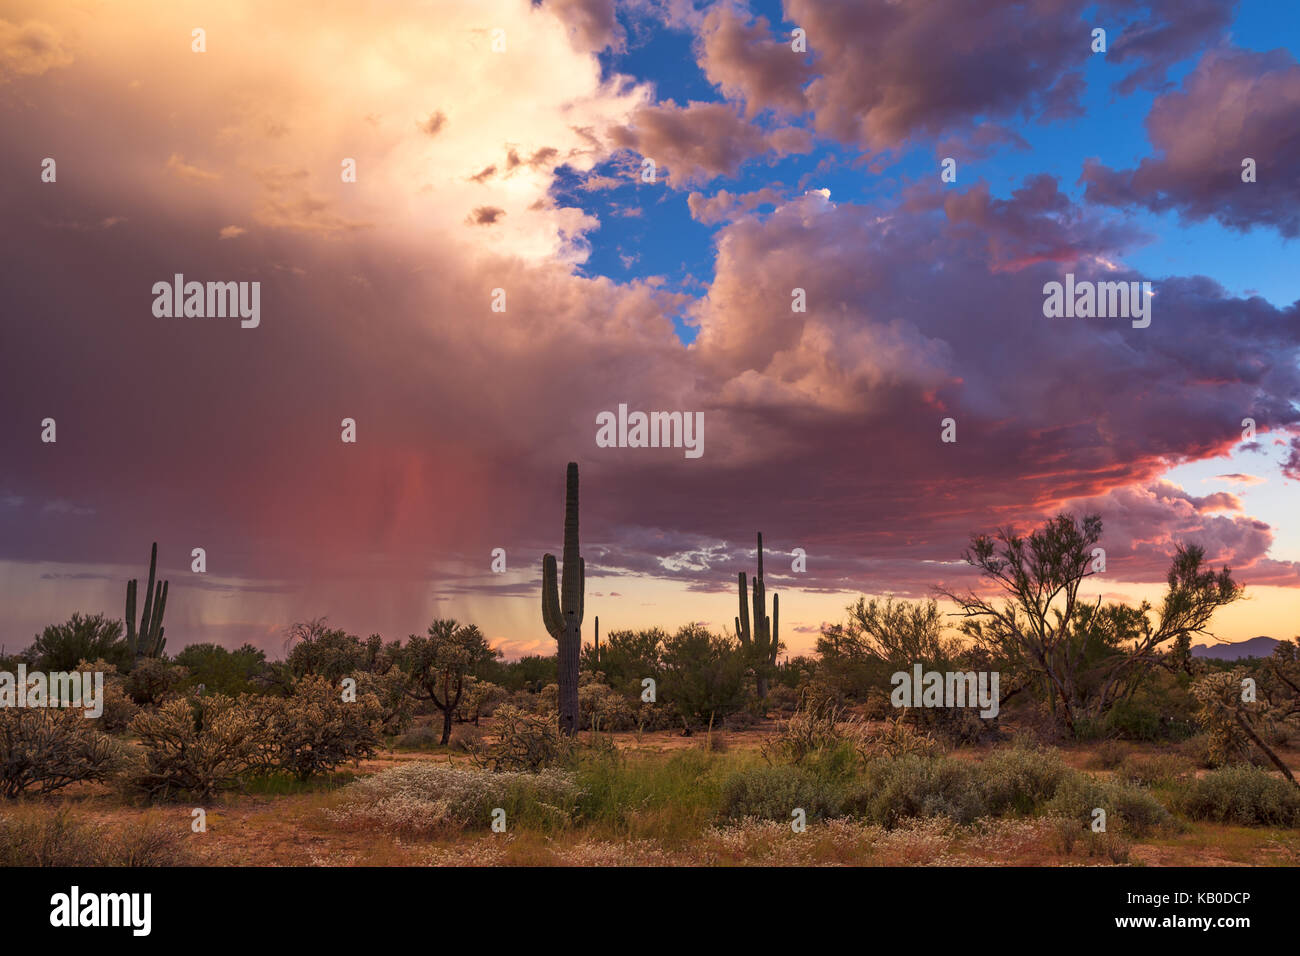 Colorful Arizona desert landscape at sunset with cactus and a monsoon storm Stock Photo